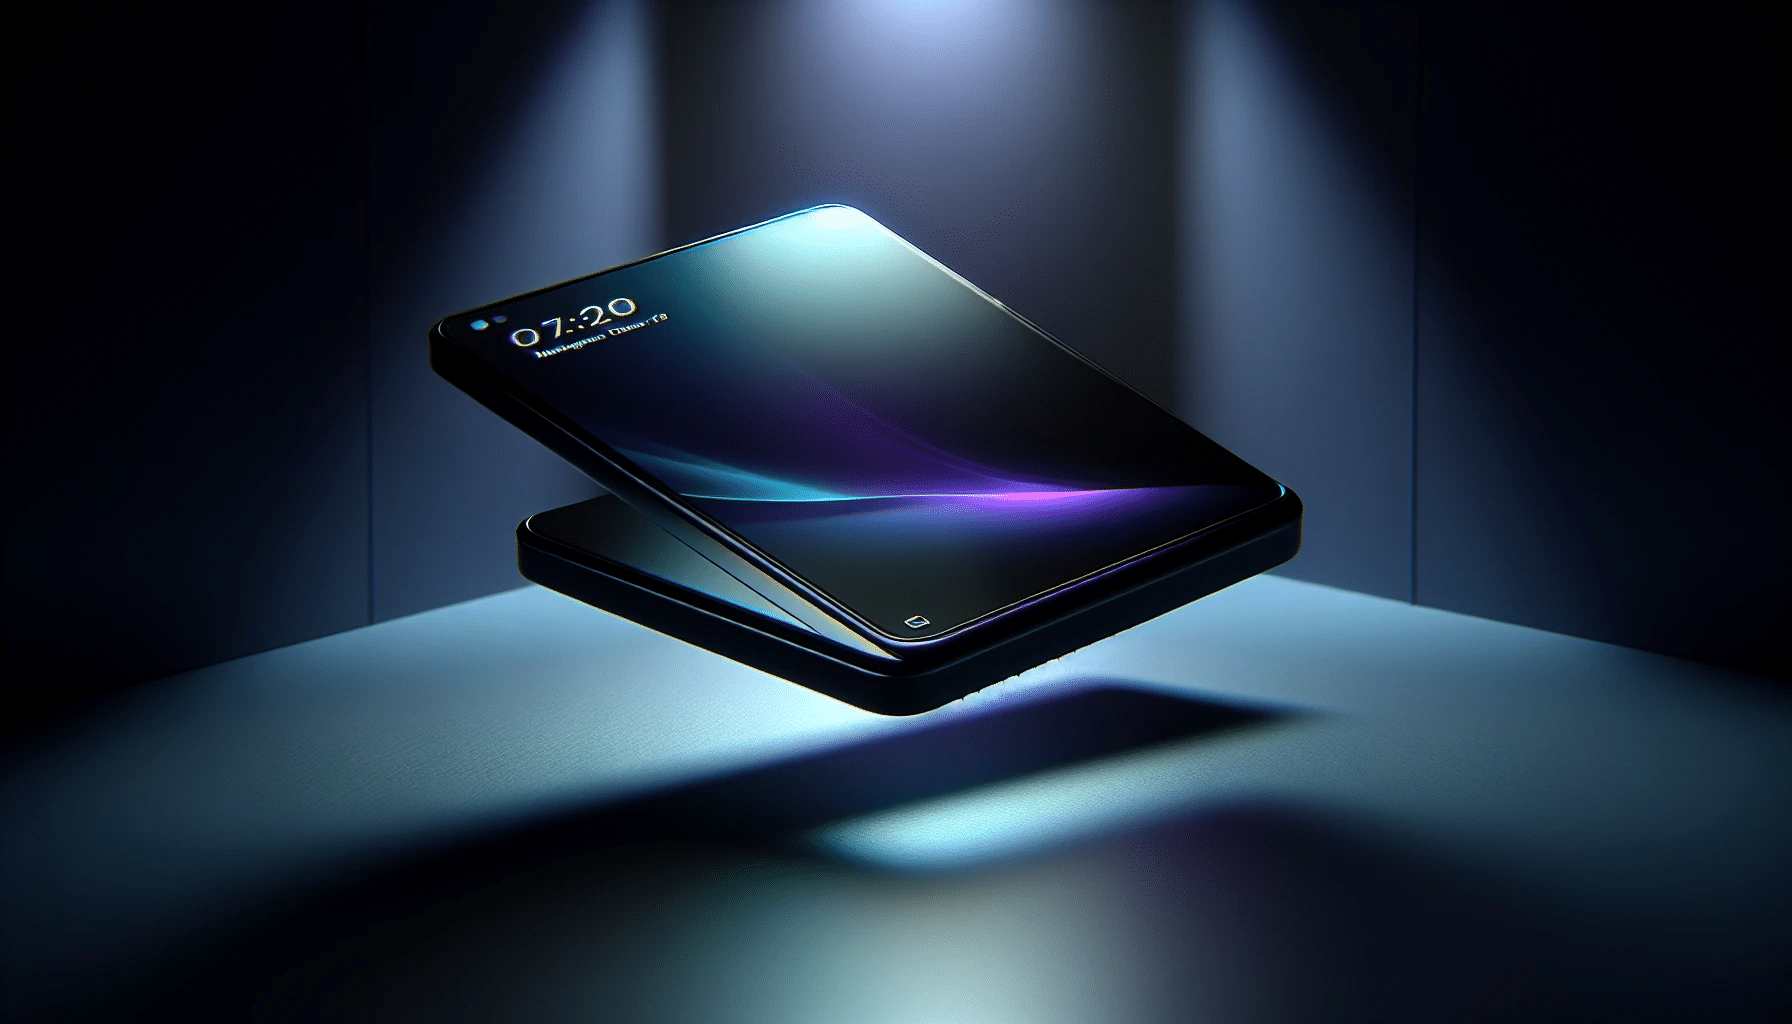 An illustration of a smartphone with dark mode interface